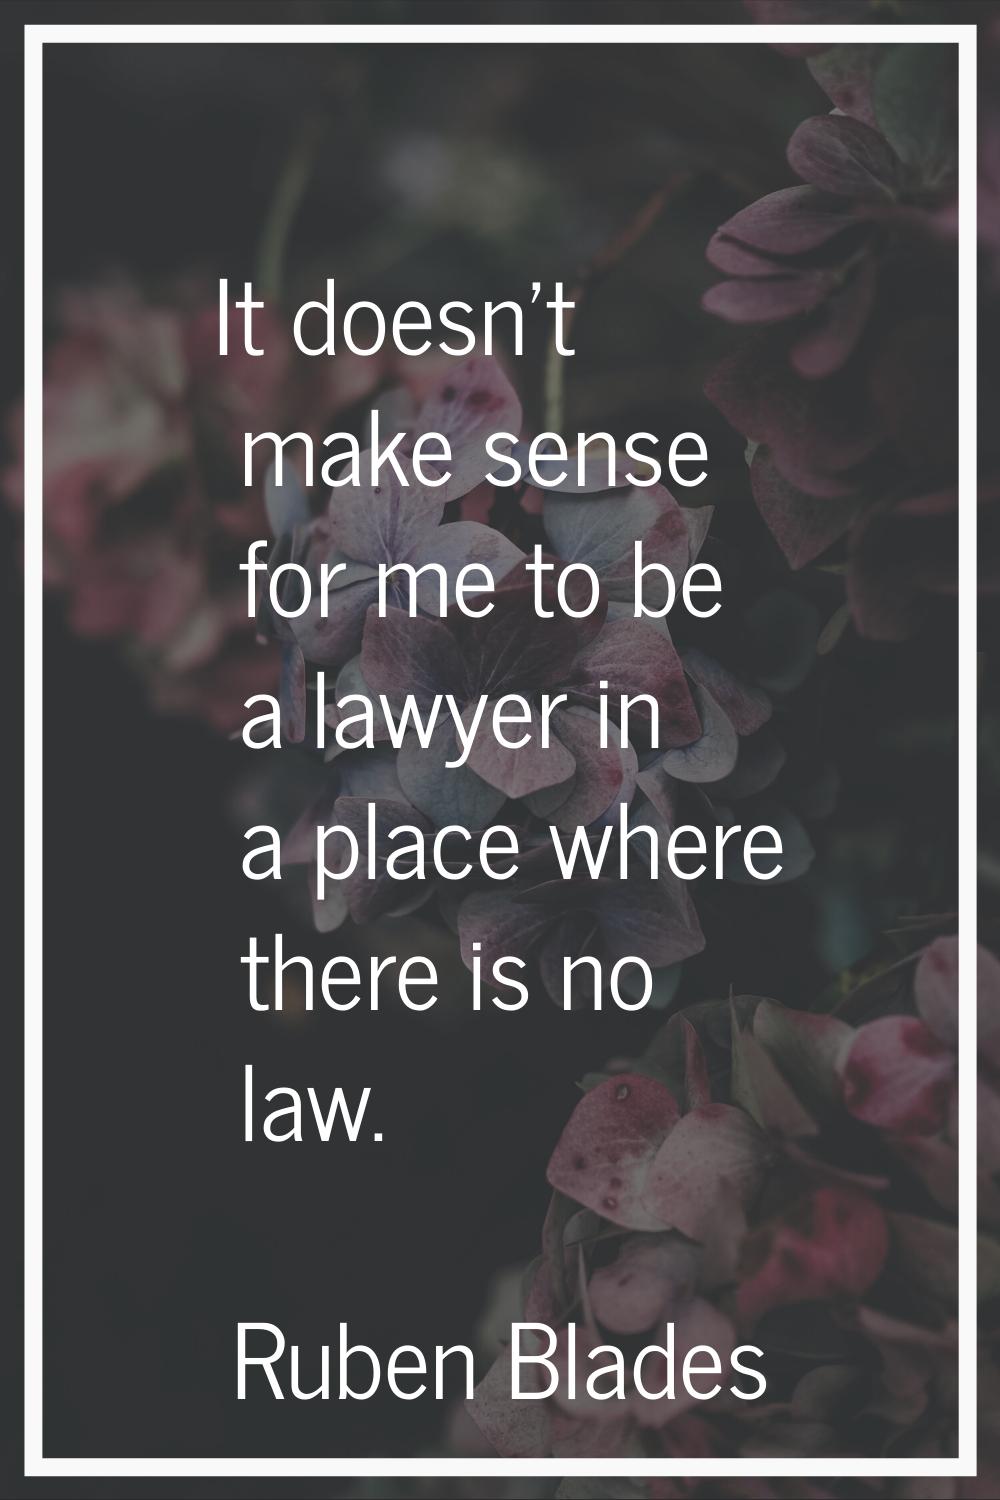 It doesn't make sense for me to be a lawyer in a place where there is no law.